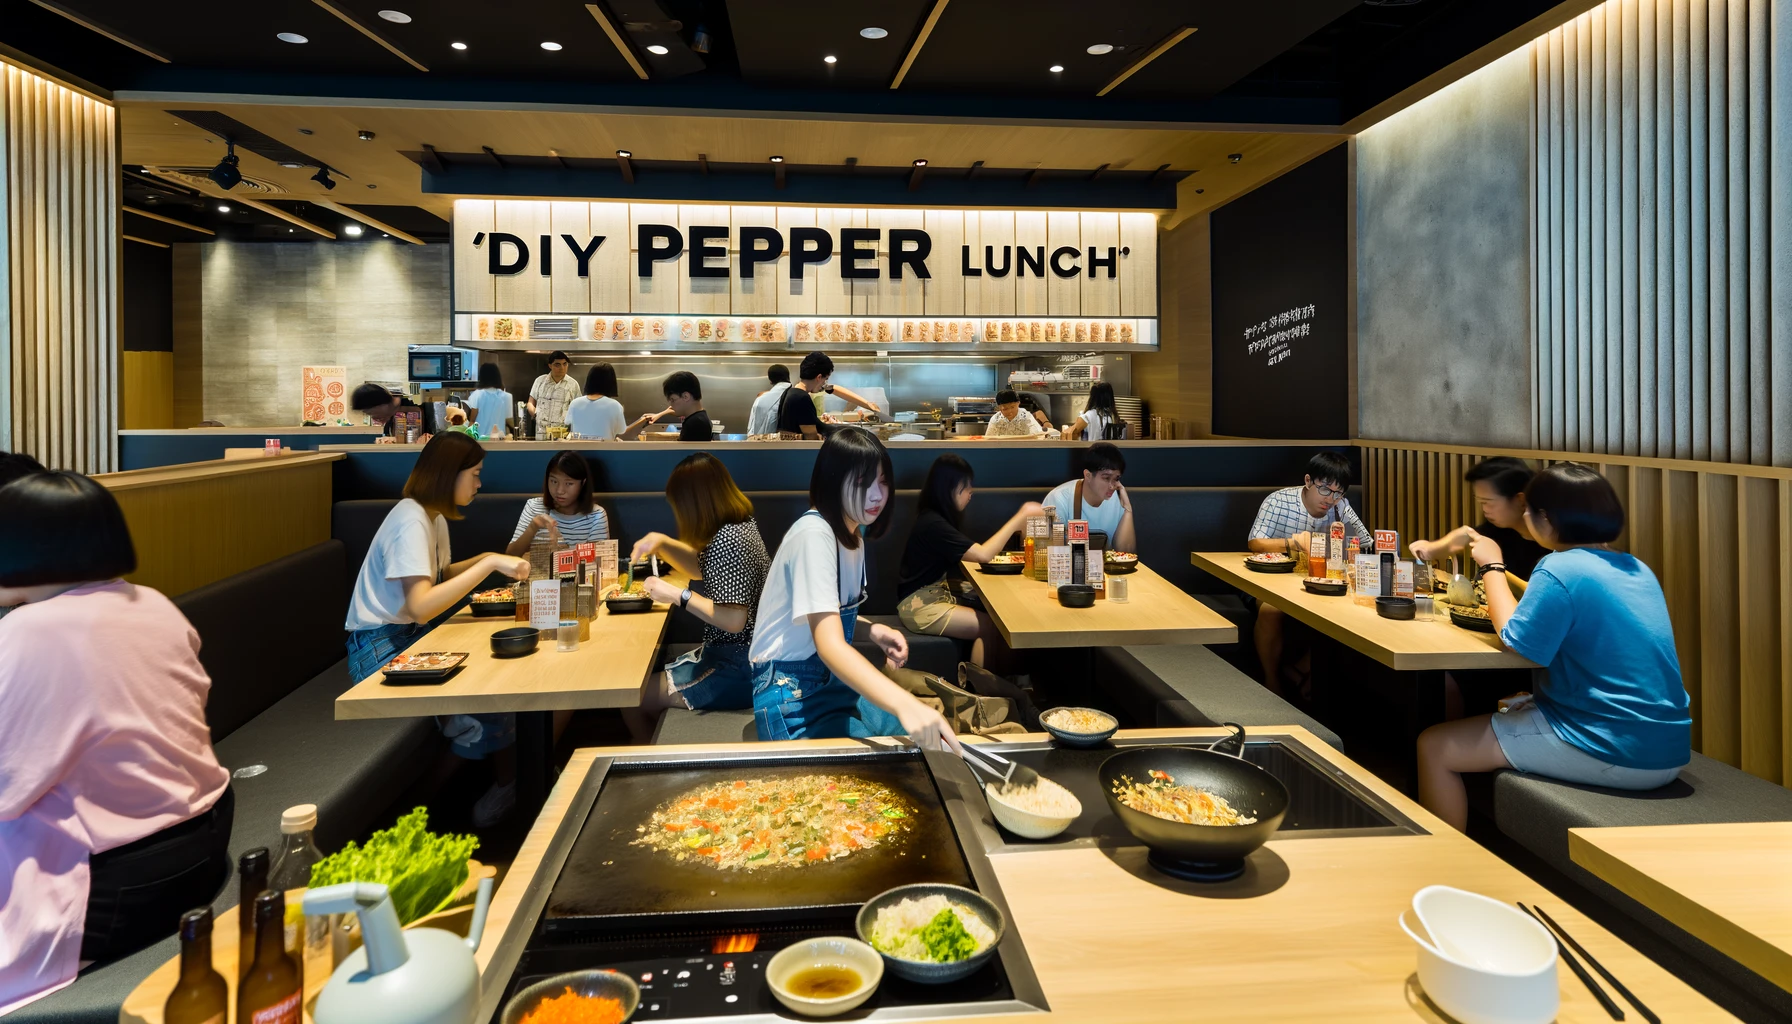 What is Pepper Lunch Famous For?